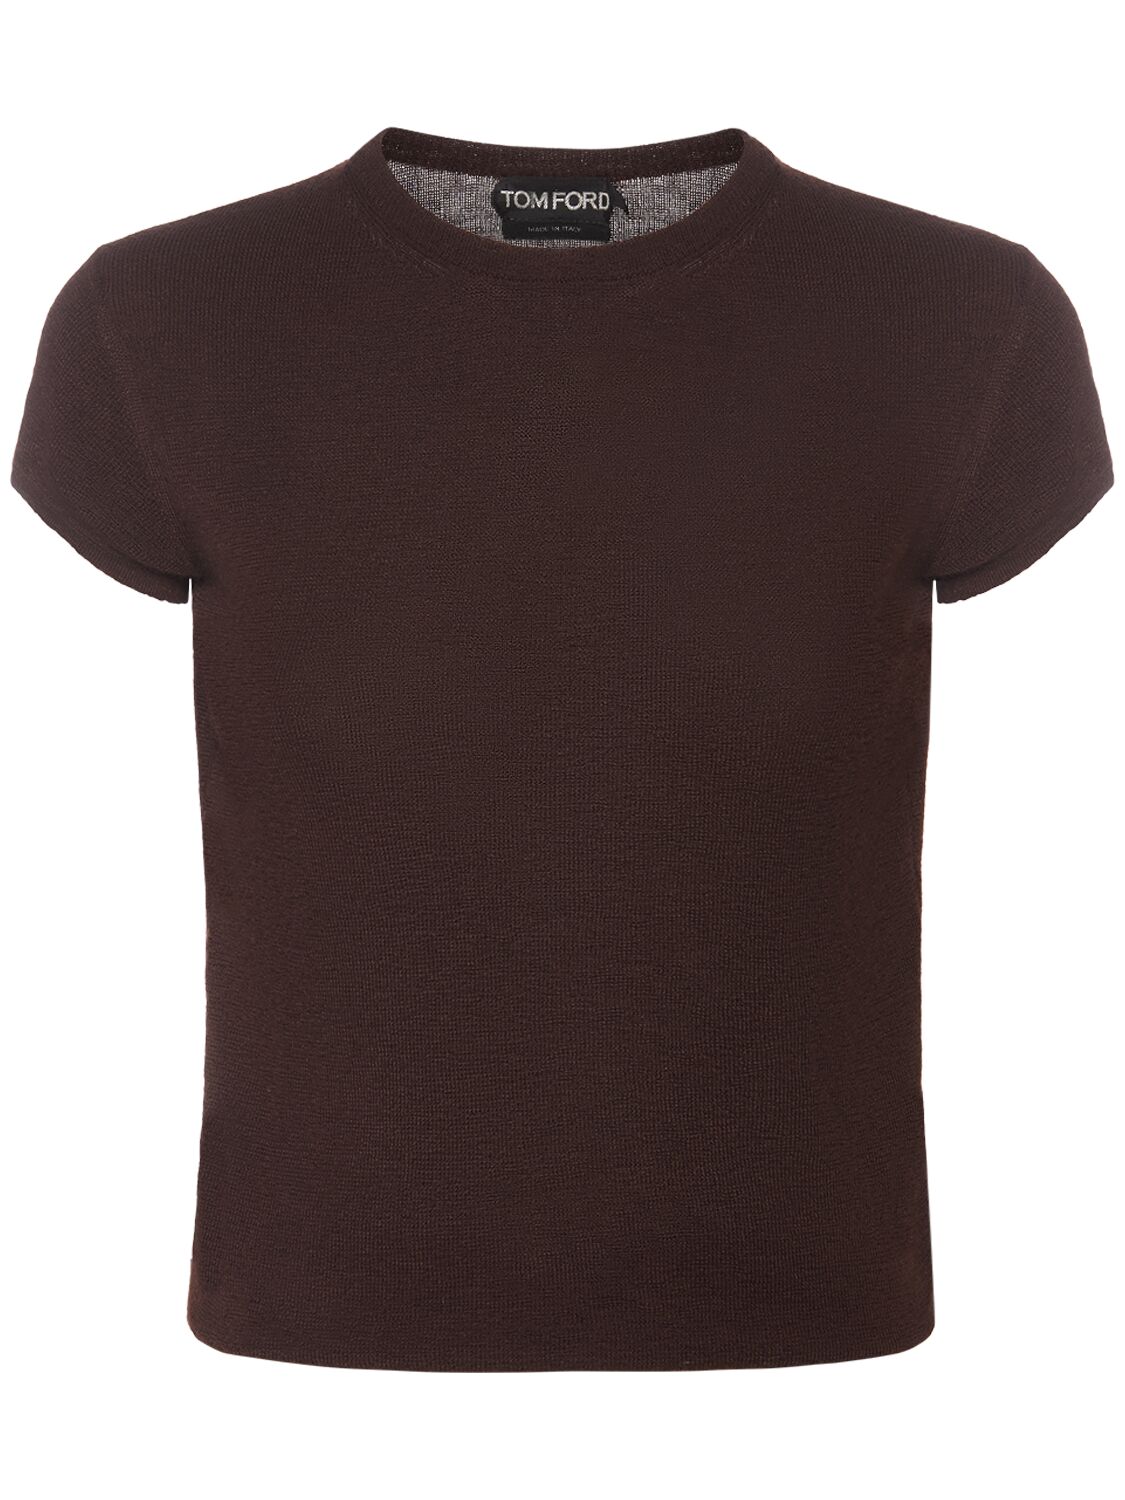 Tom Ford Cashmere & Silk Knit Short Sleeve Top In Brown